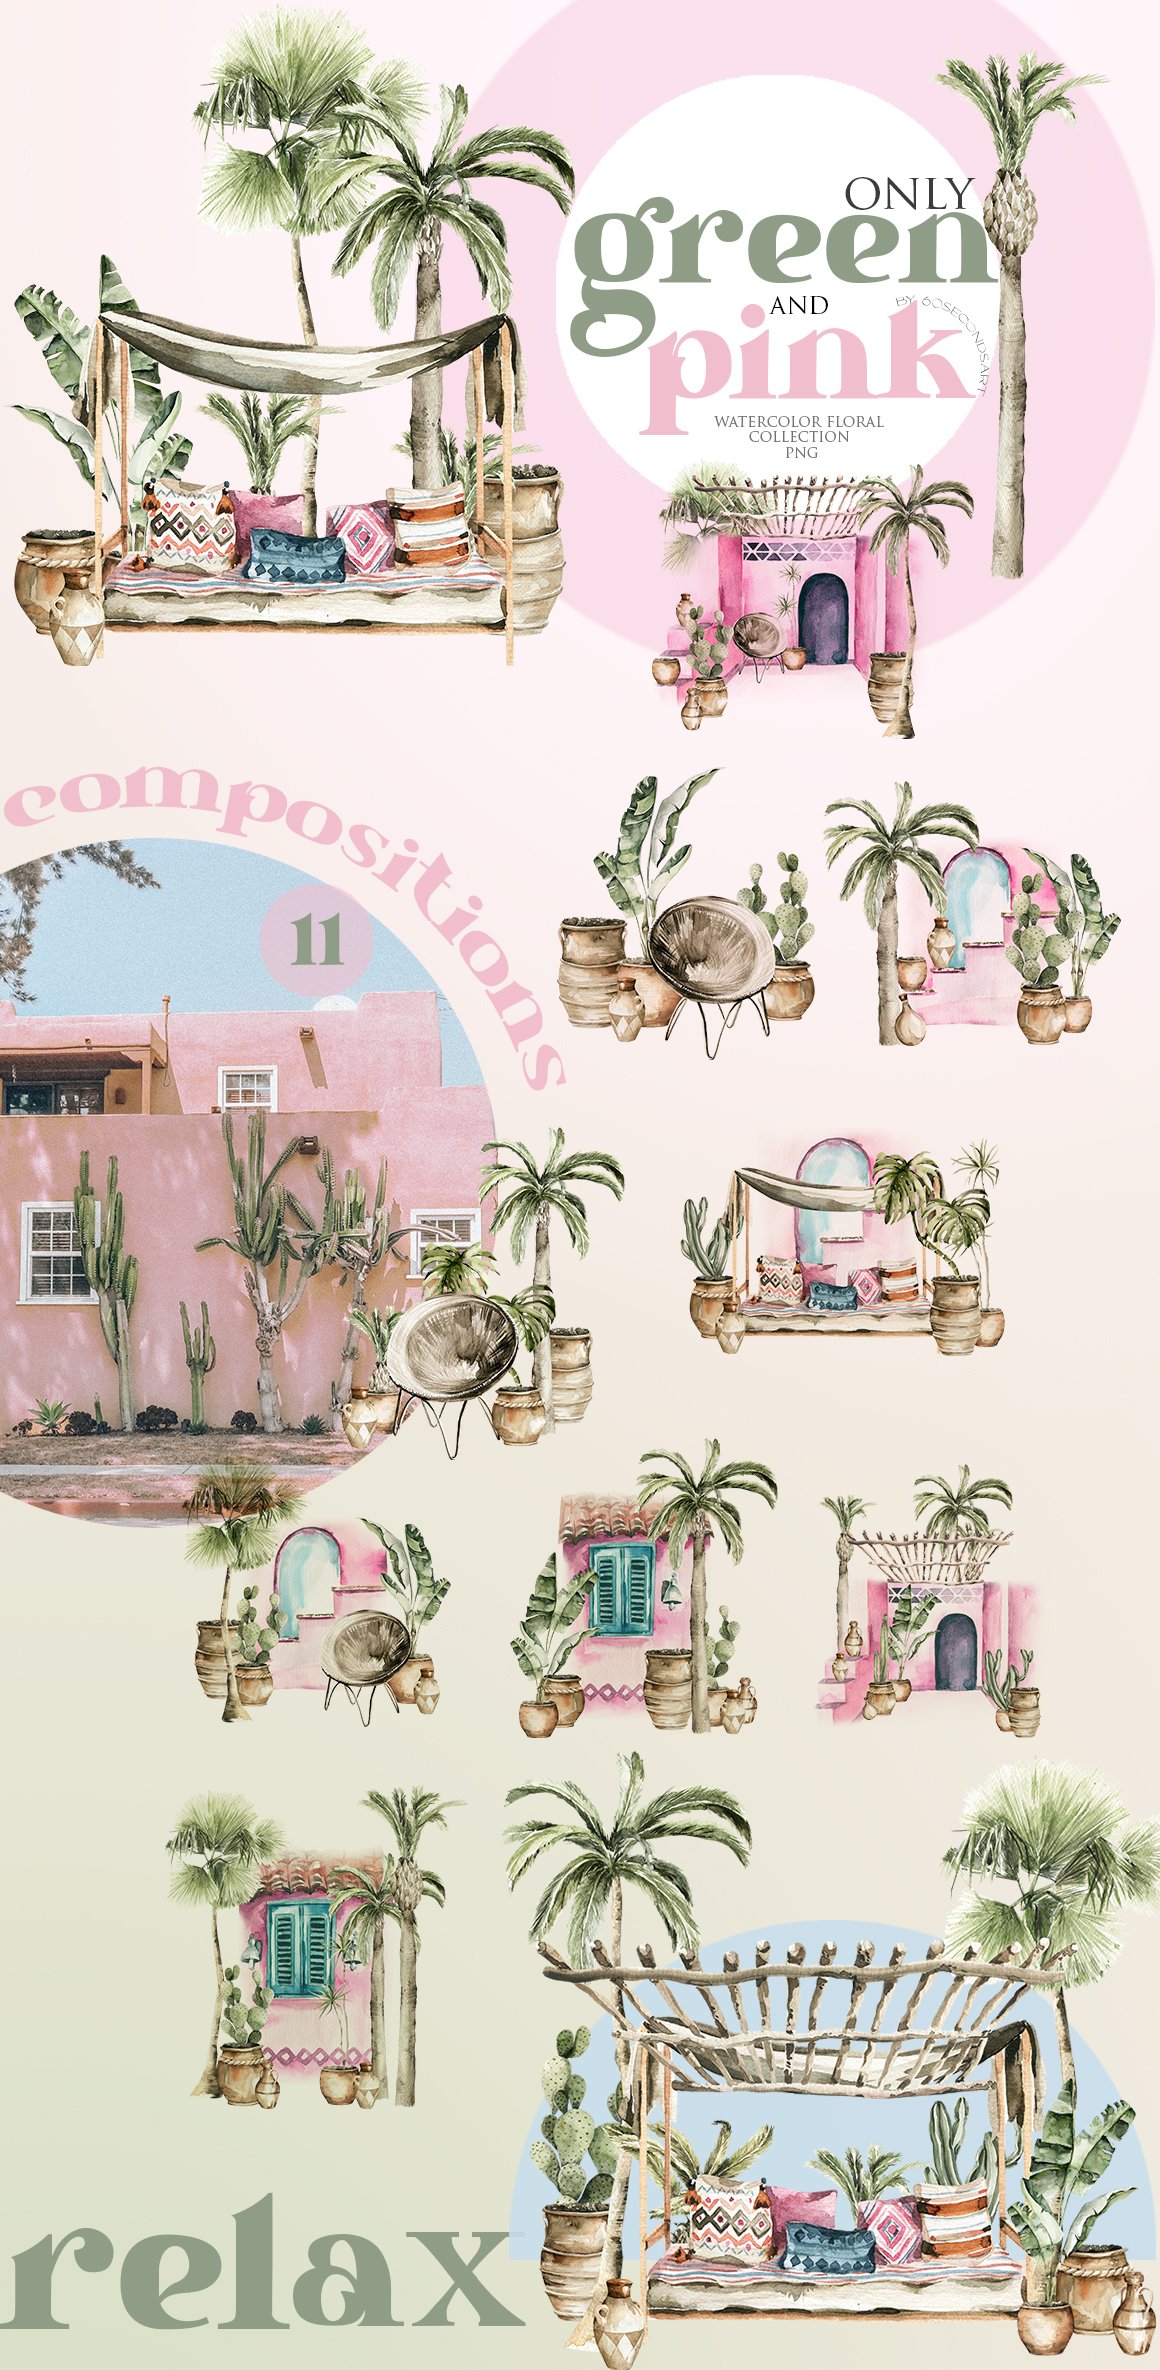 Pink poster with palm trees and a pink house.